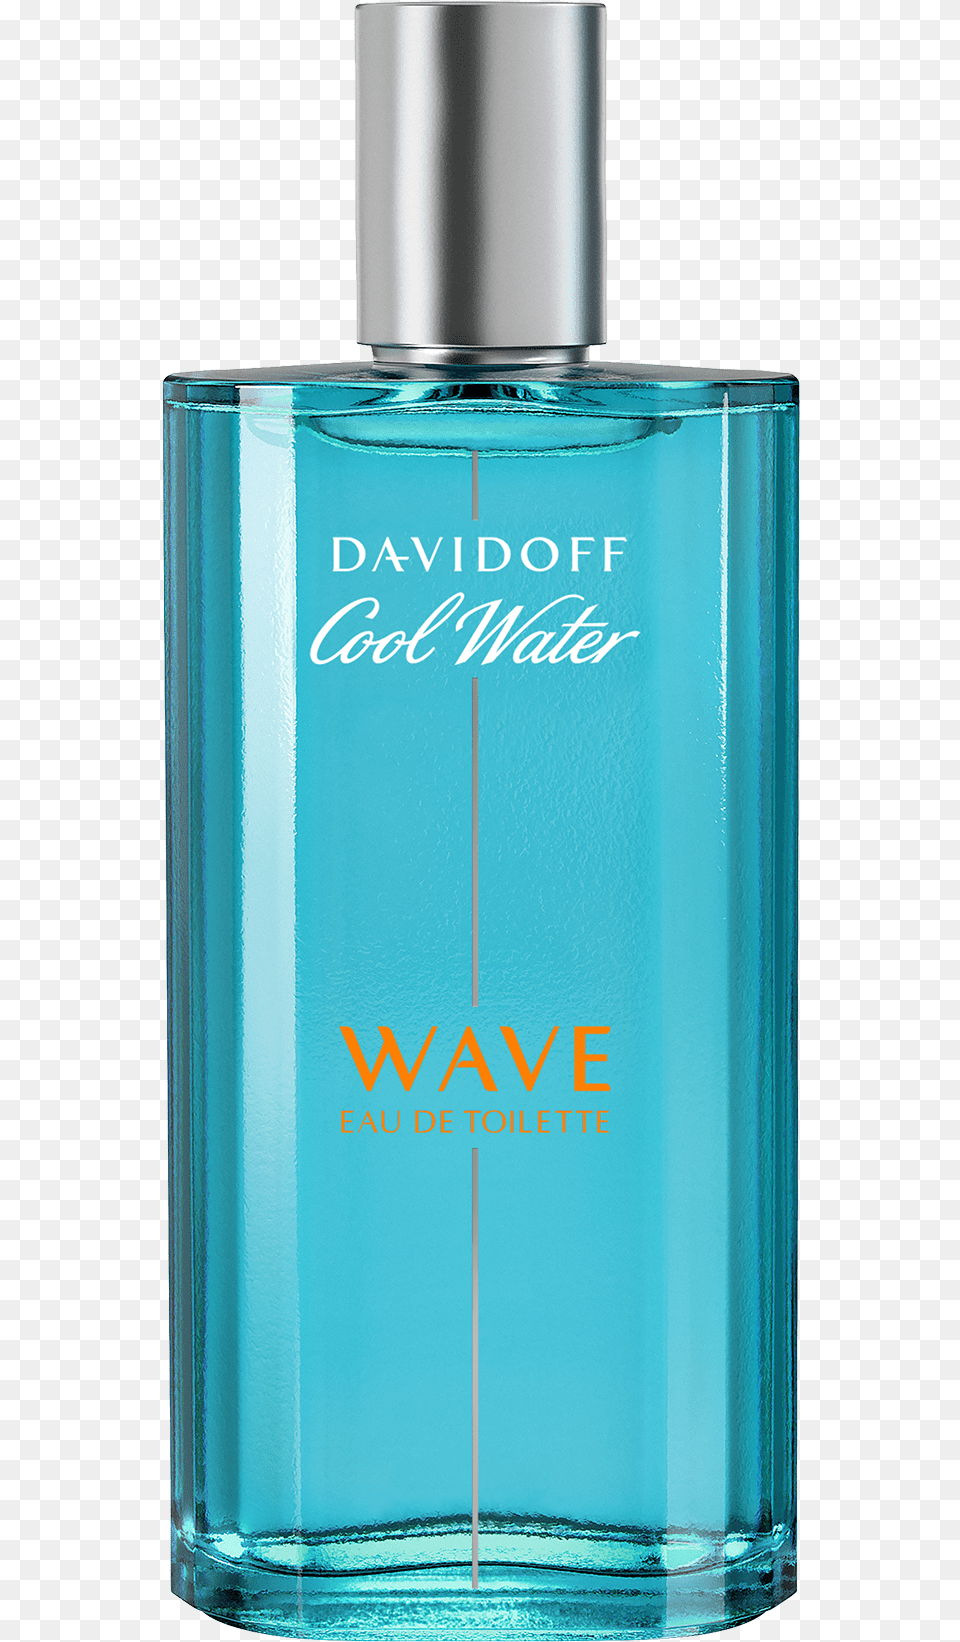 Davidoff Cool Water Wave Edt, Bottle, Cosmetics, Perfume, Aftershave Png